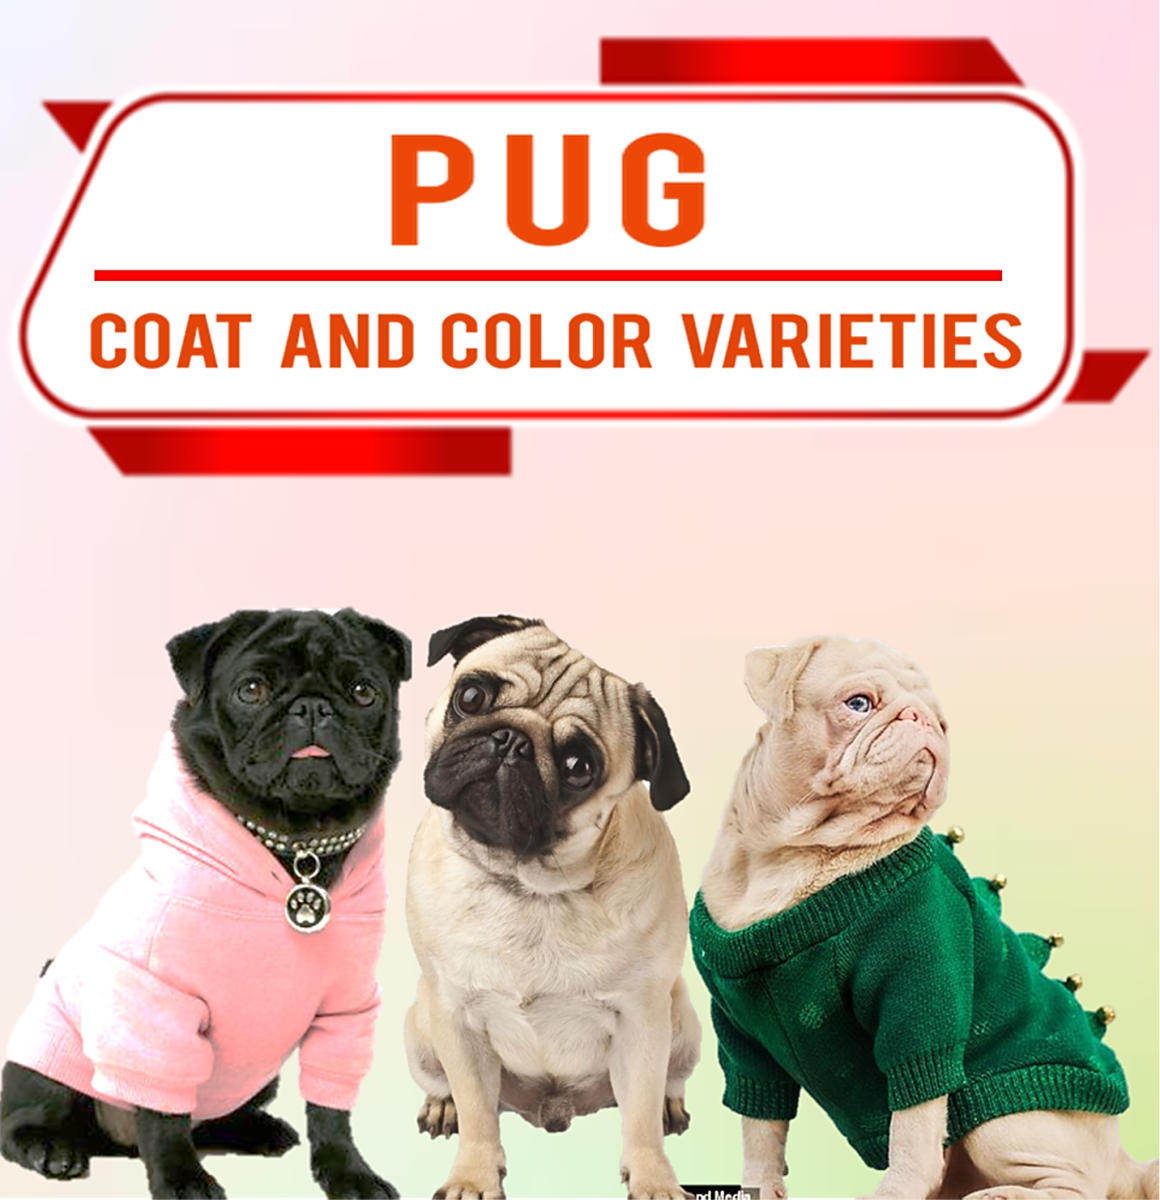 Pug Coat and Color Varieties